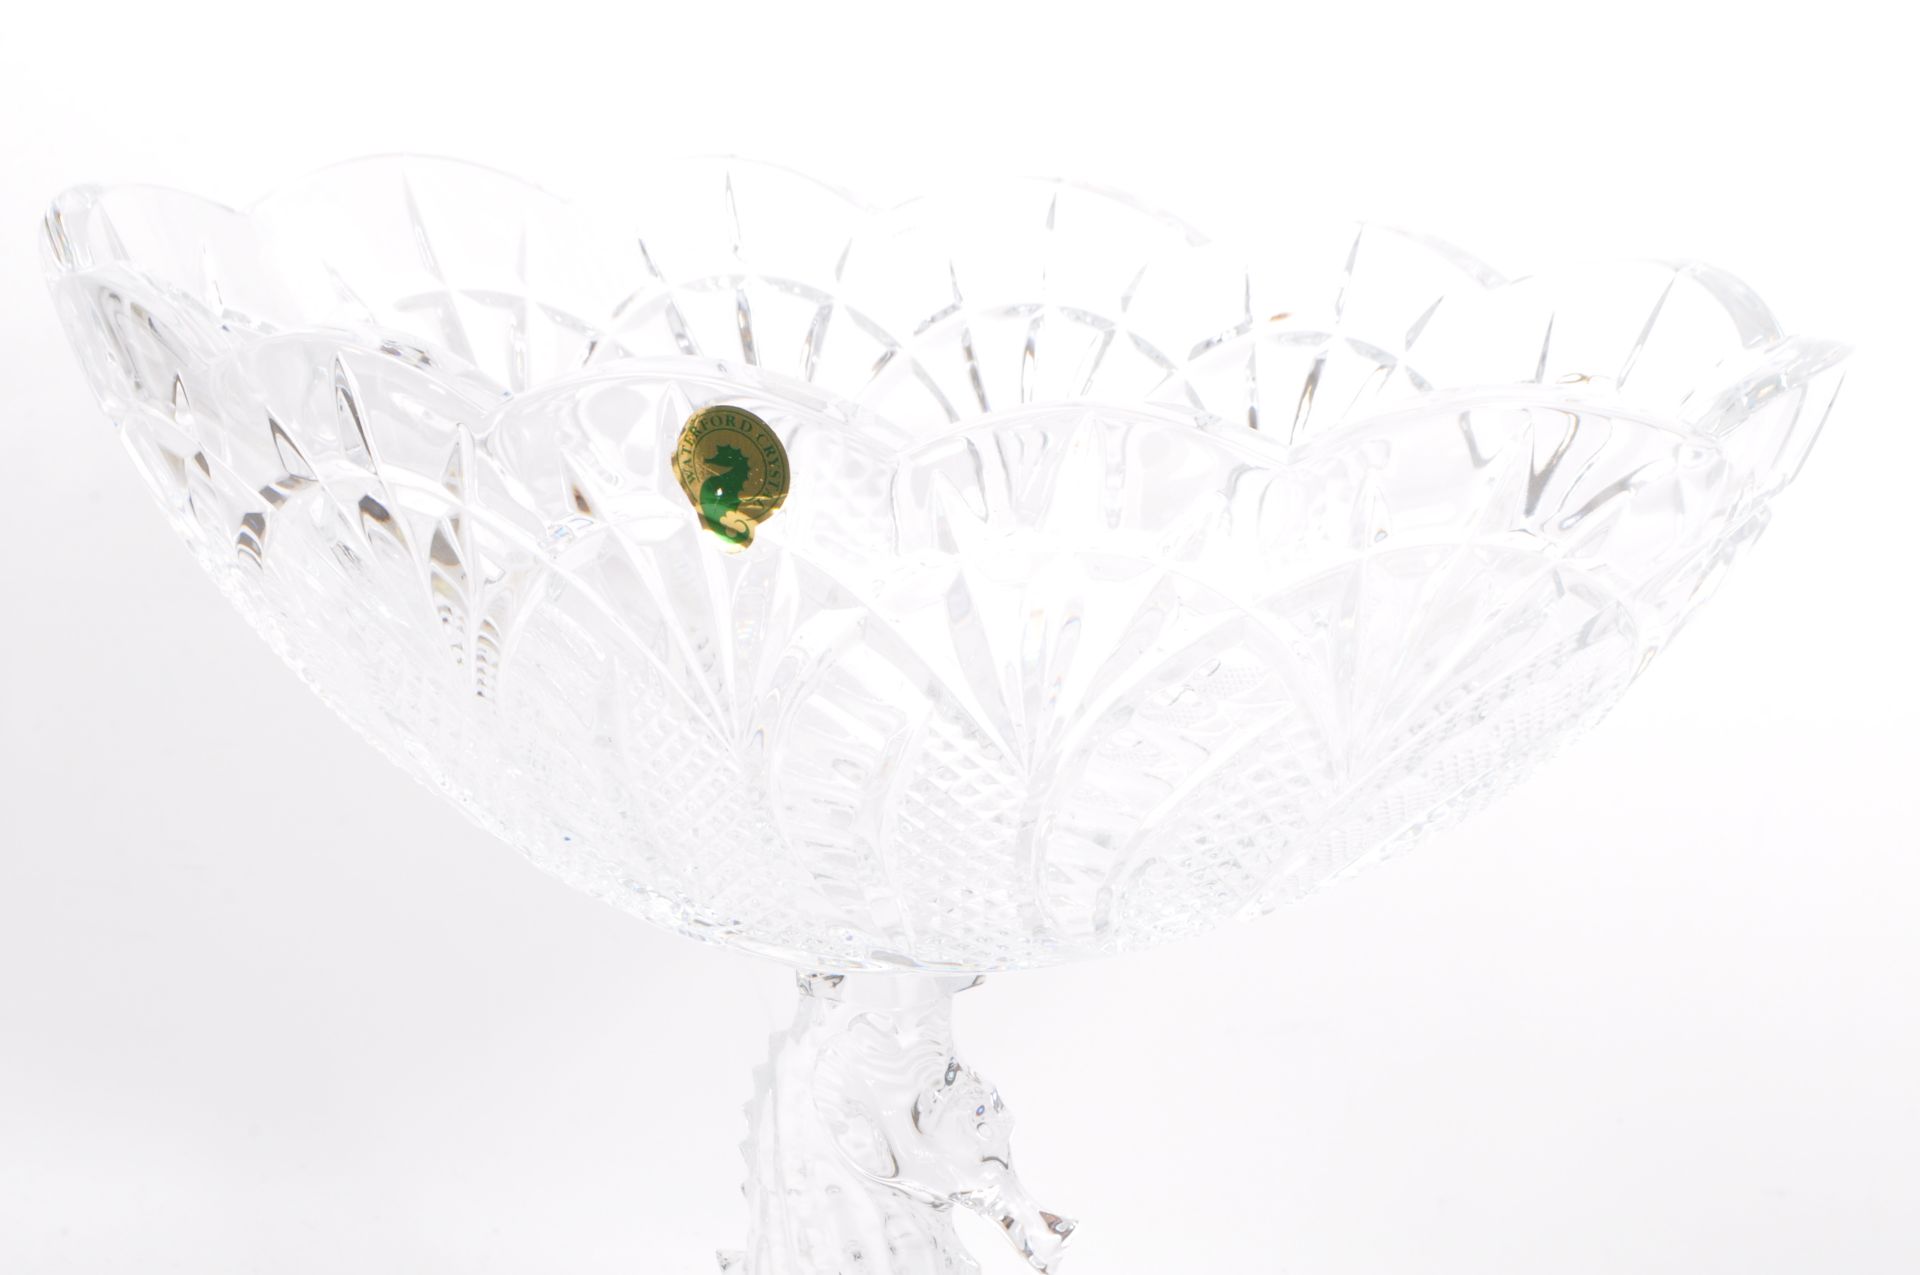 WATERFORD CRYSTAL GLASS - SEAHORSE TAZZA CENTREPIECE NOS - Image 6 of 7